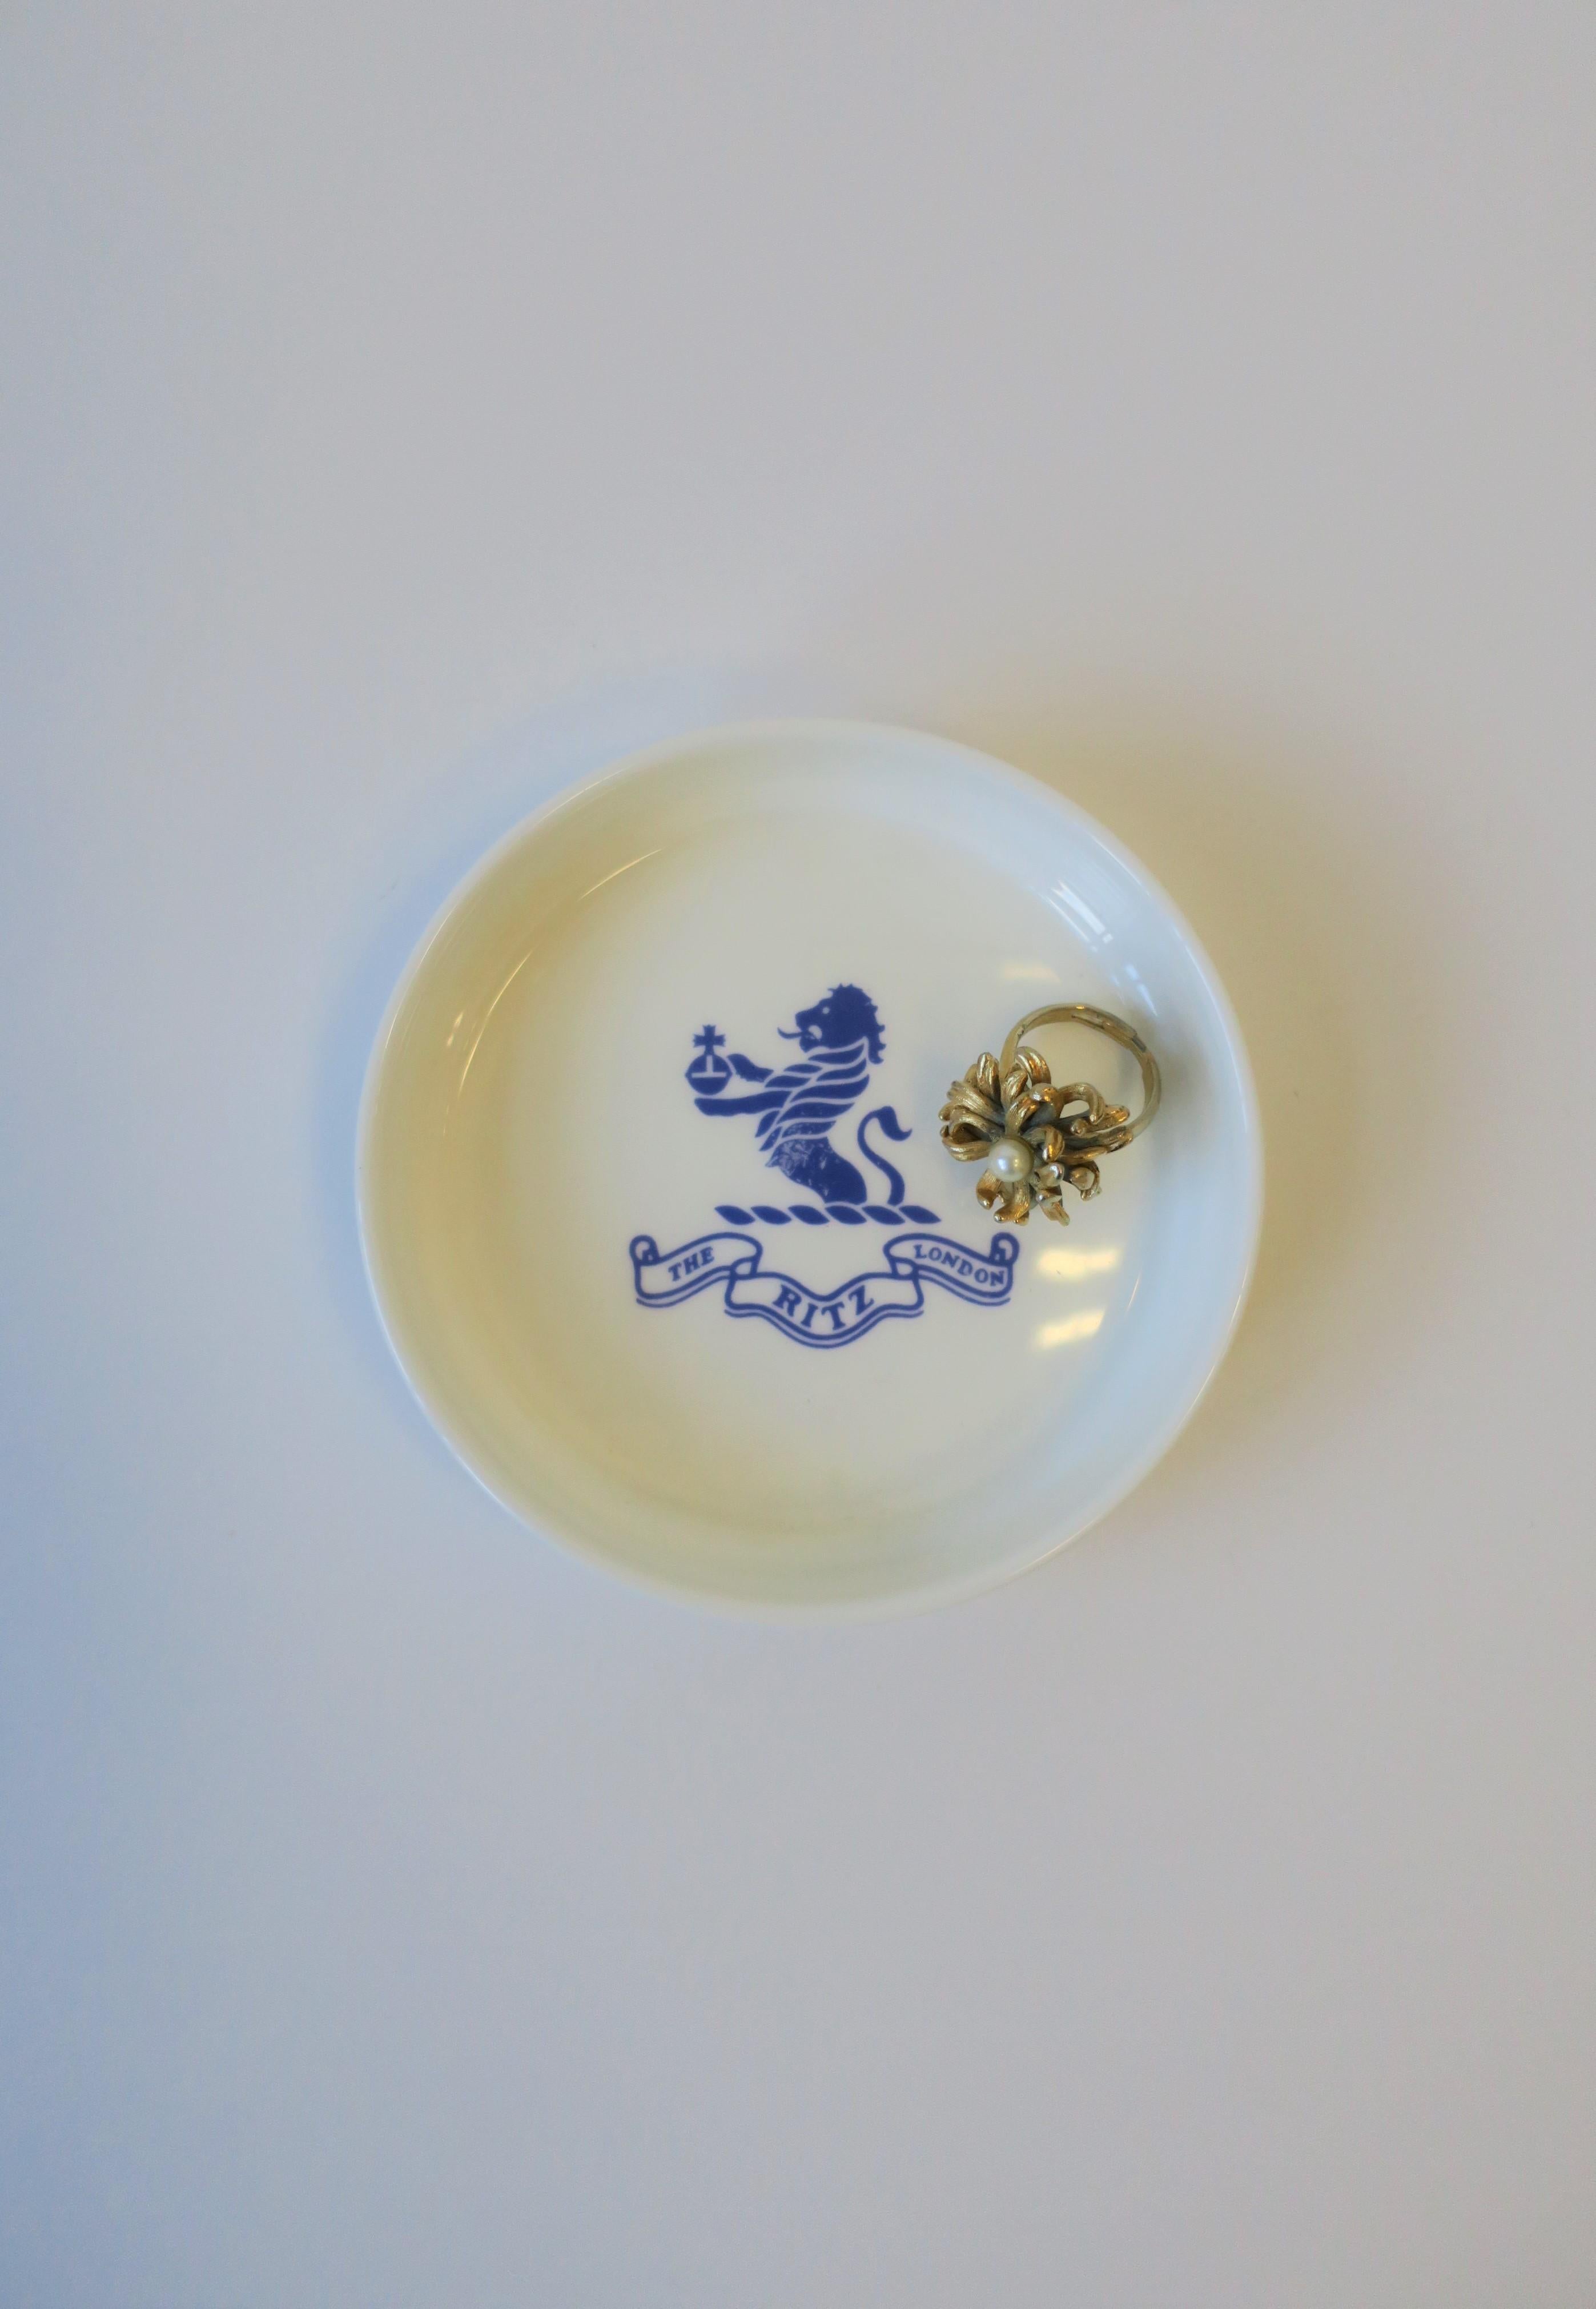 20th Century The Ritz London Blue and White Porcelain Jewelry Dish